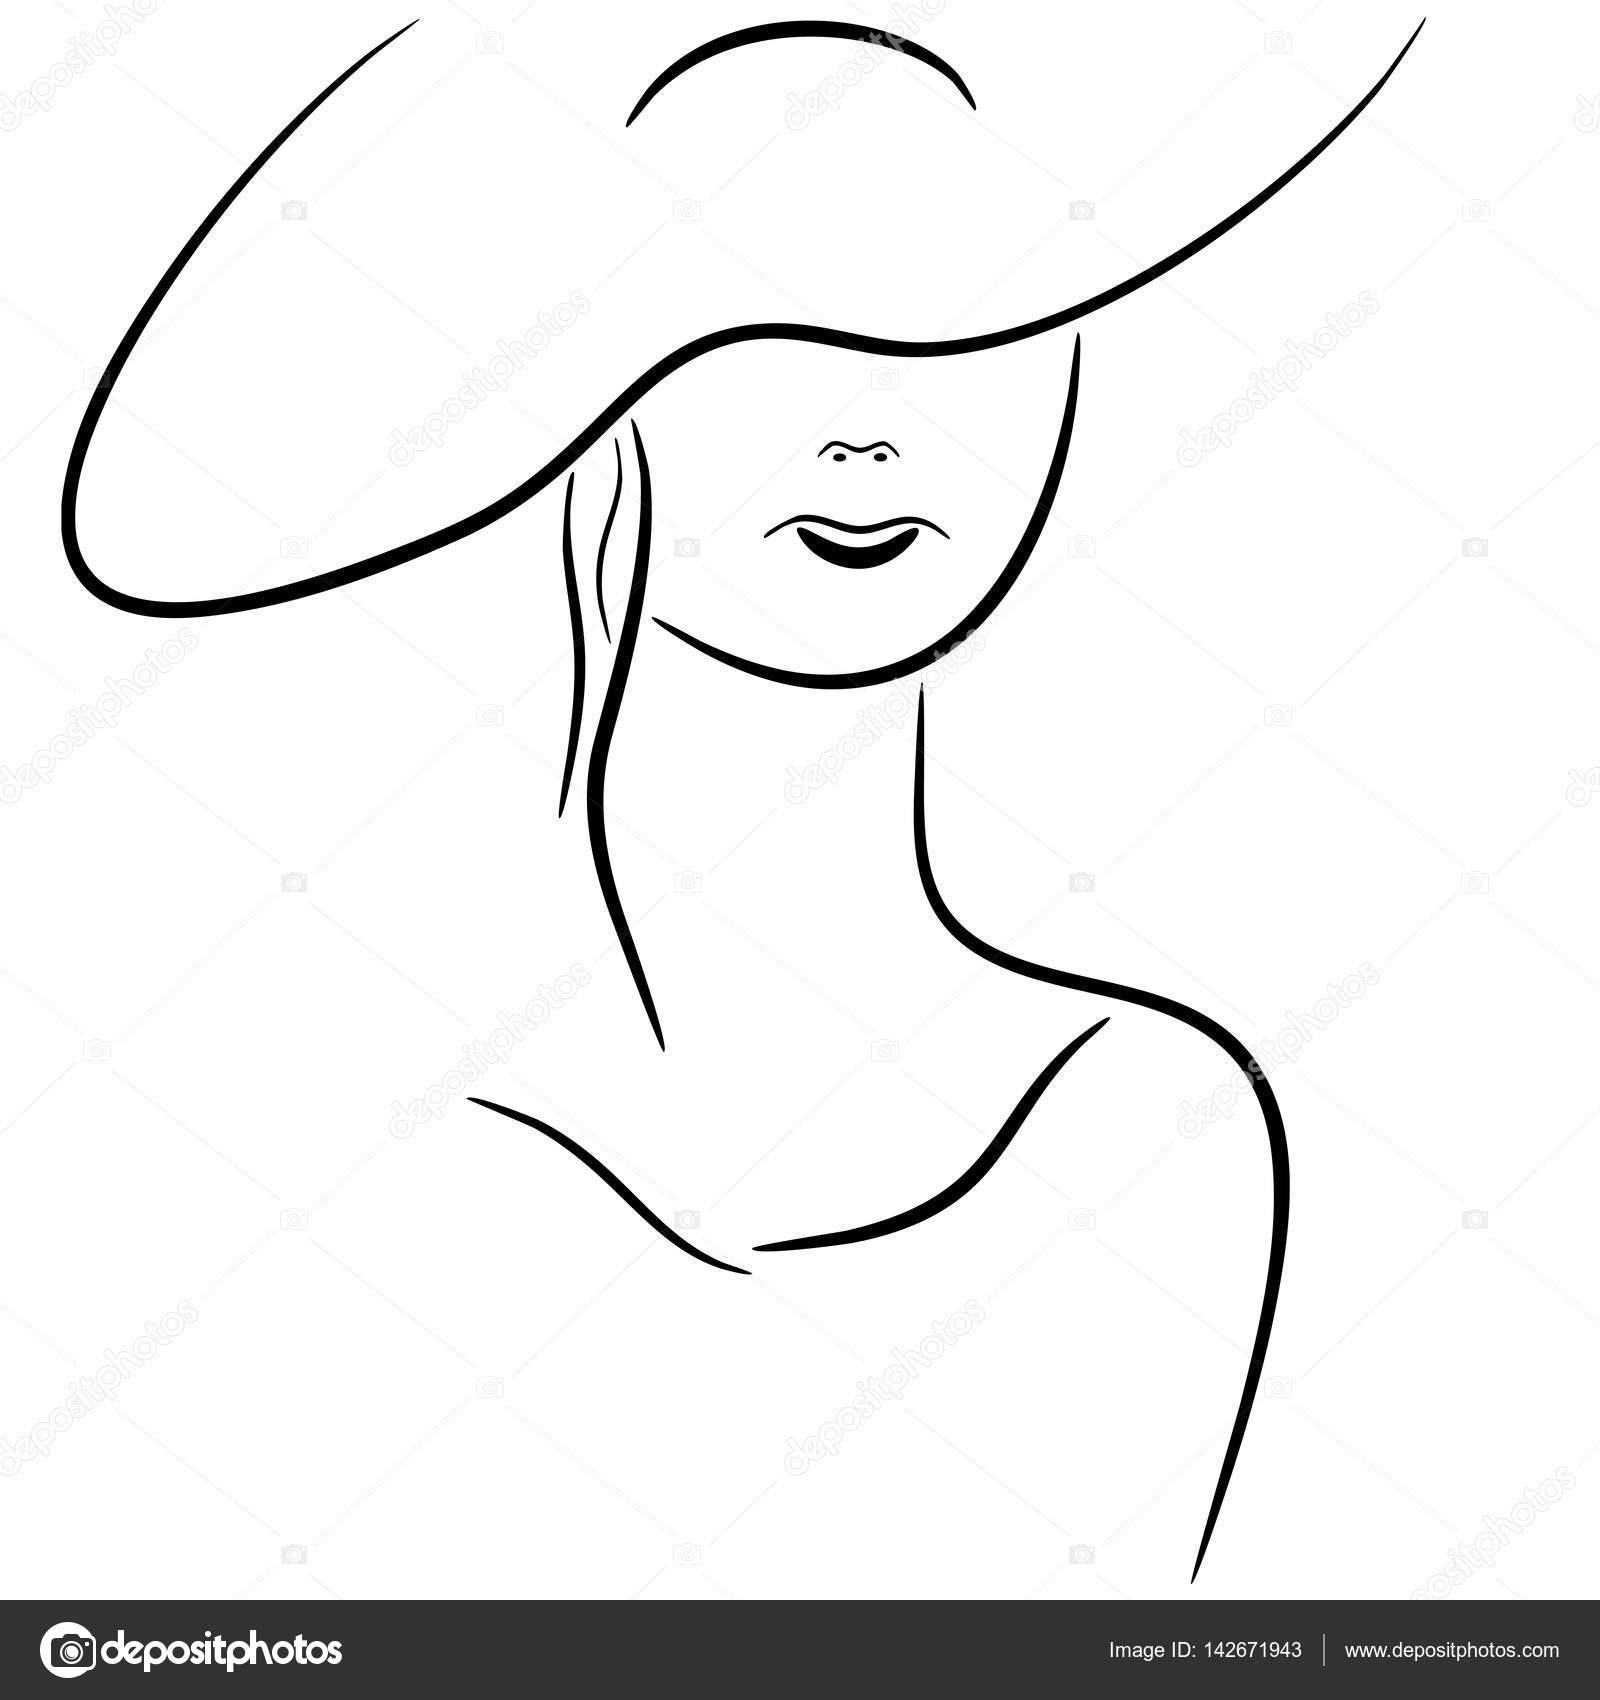 Lady hat line drawing. — Stock Vector © LukAlex #142671943